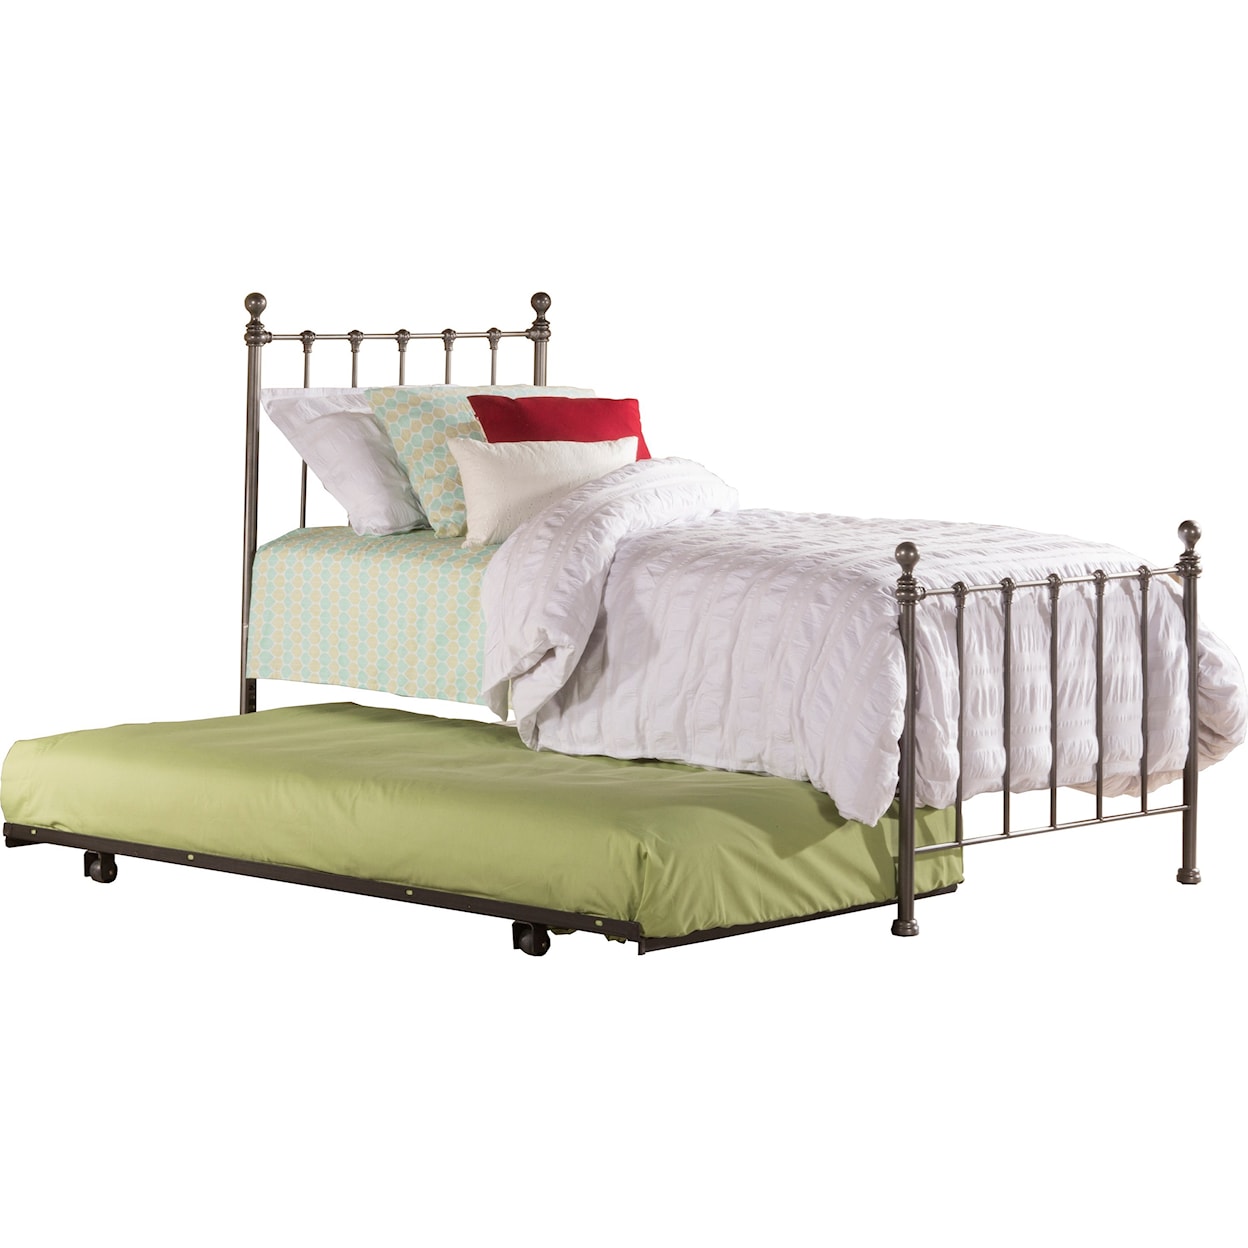 Hillsdale Metal Beds Twin Bed with Trundle